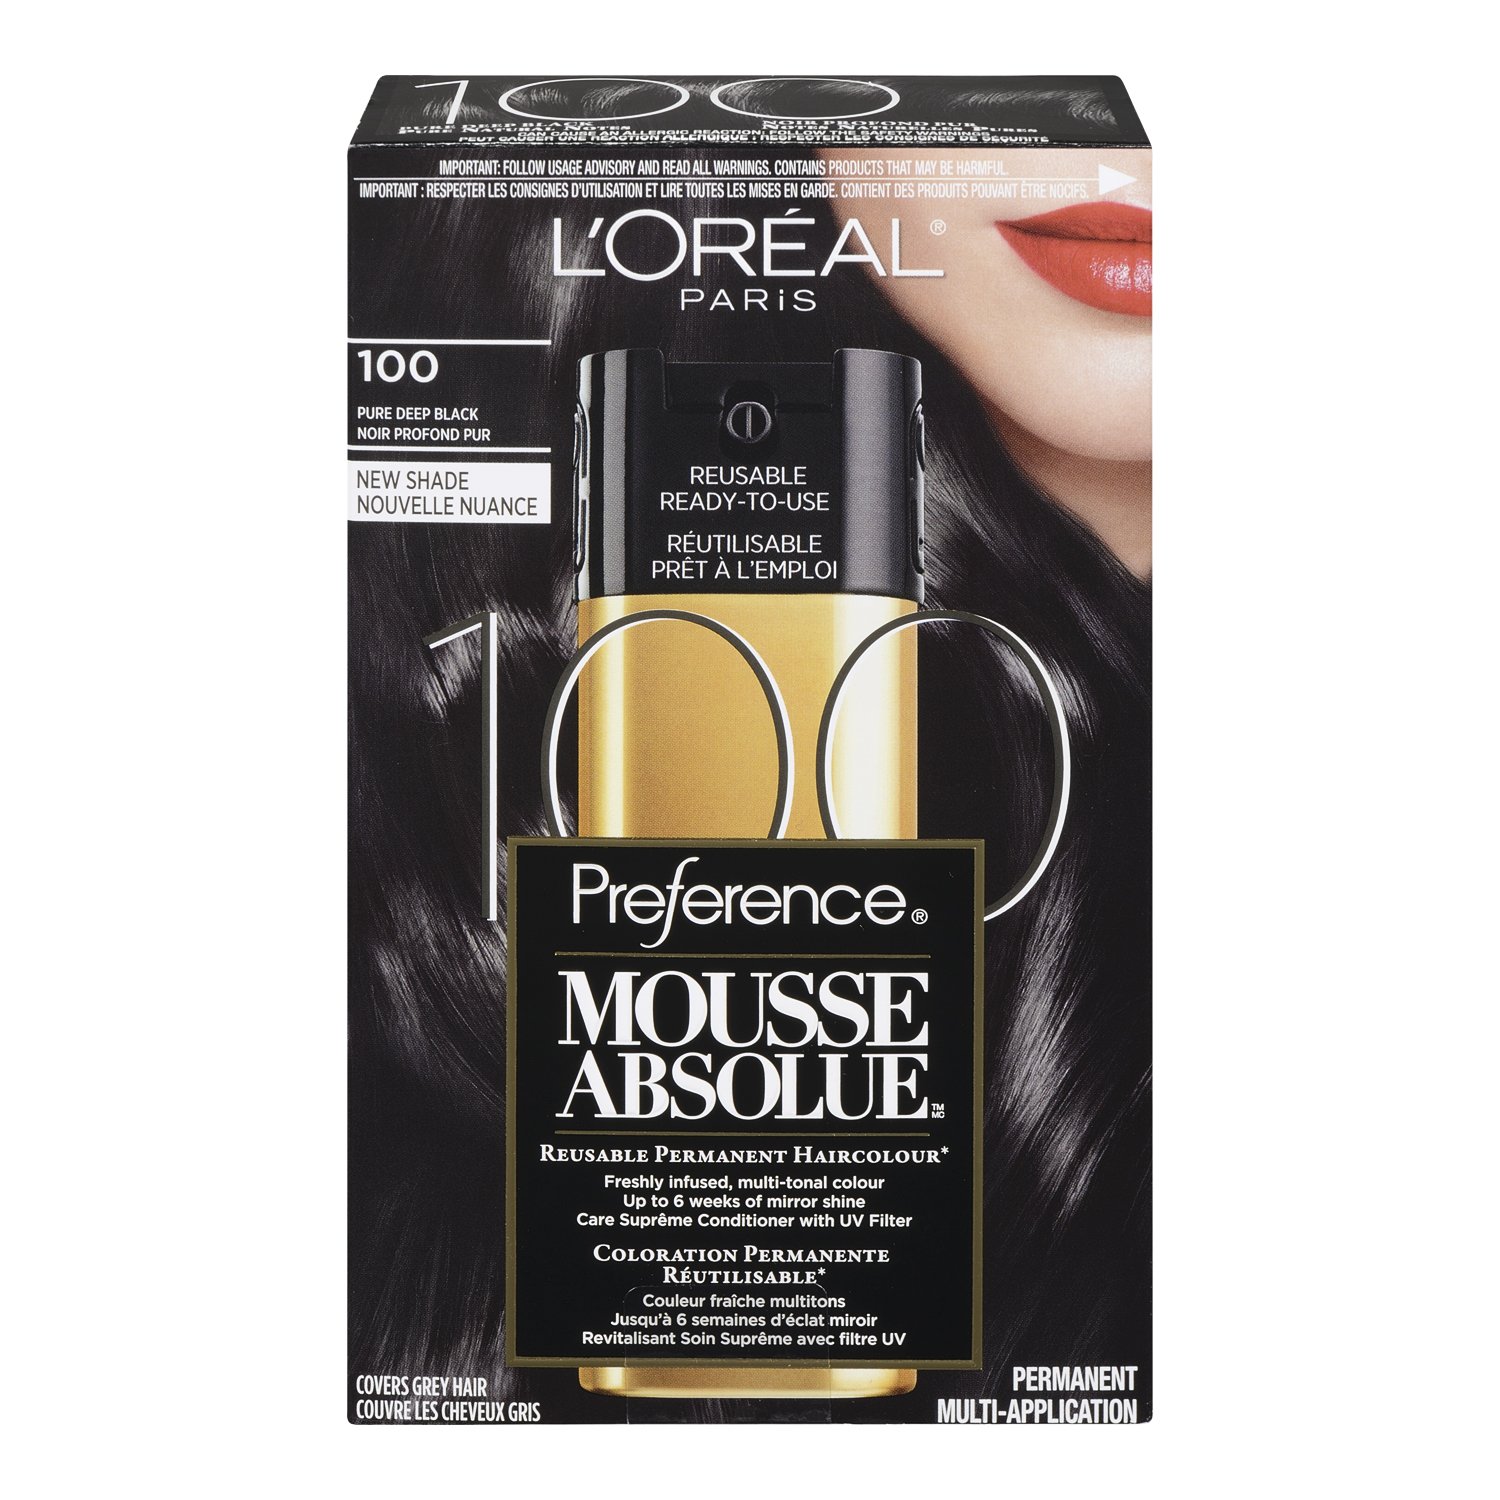 asian hairdye - L’Oreal Paris Preference Mousse Absolue in Pure Deep Black 